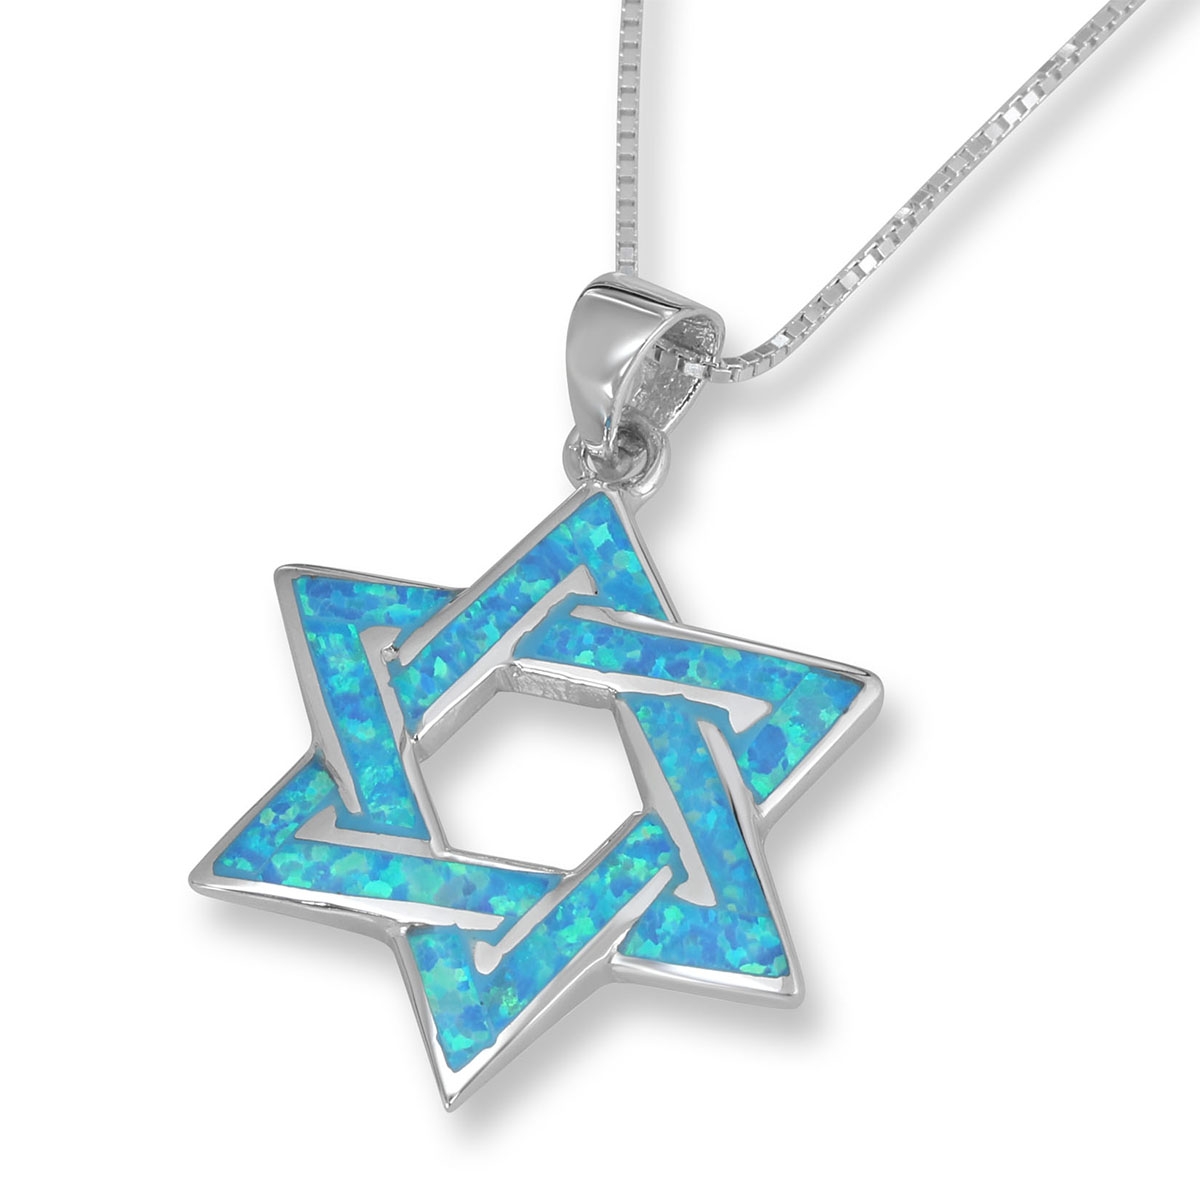 Interlocked Star of David Sterling Silver with Blue Opal - 1